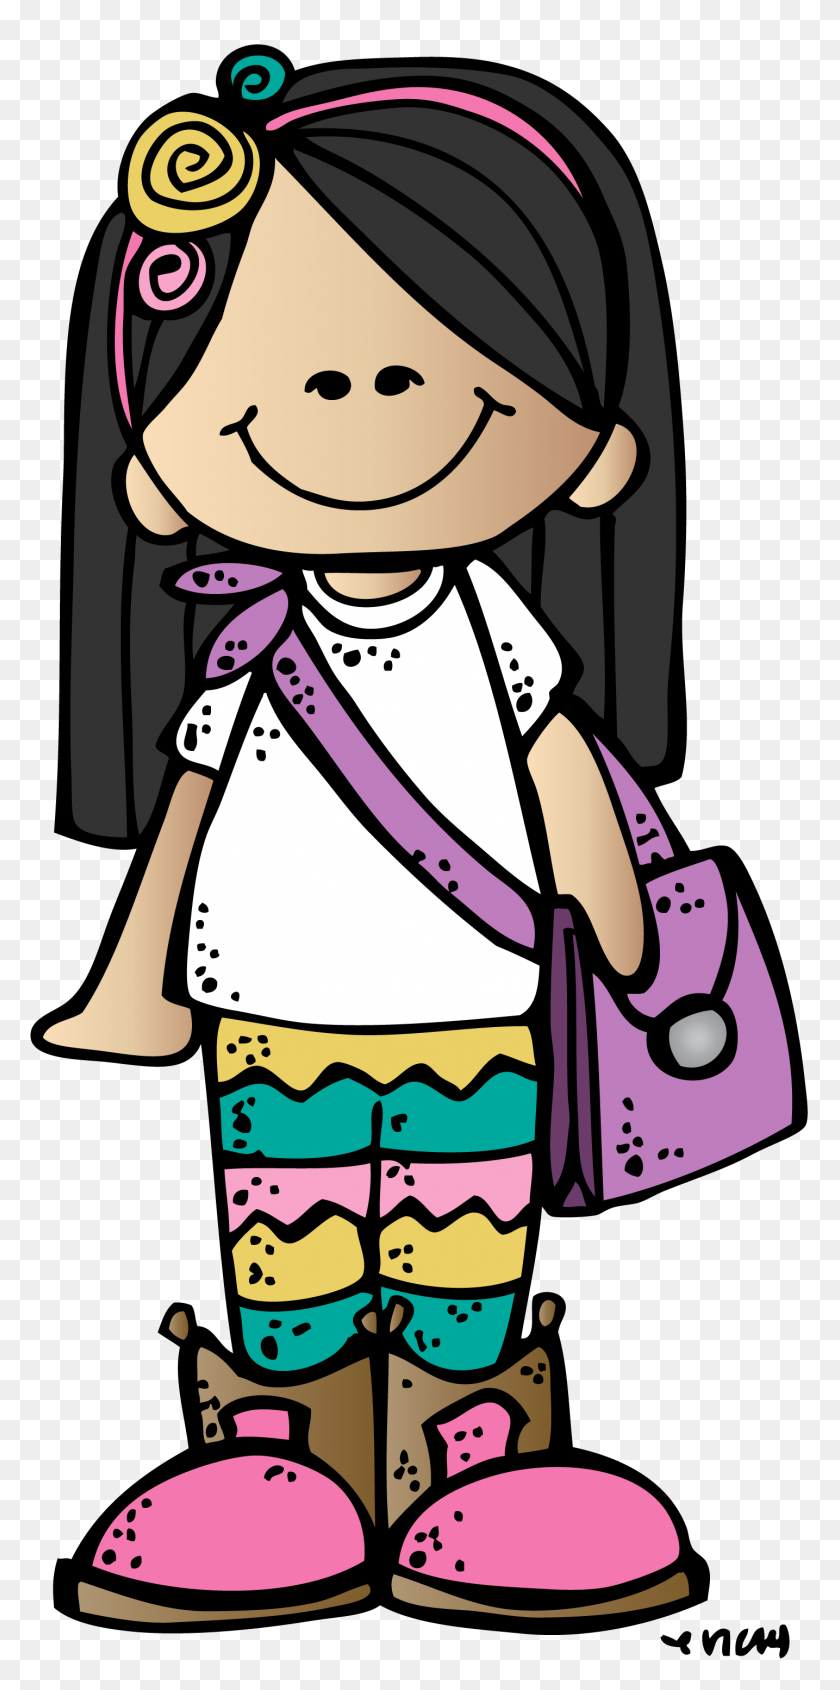 1435x3000 Missionary Clipart Female Cousin, Missionary Female Cousin - Cousin Clipart